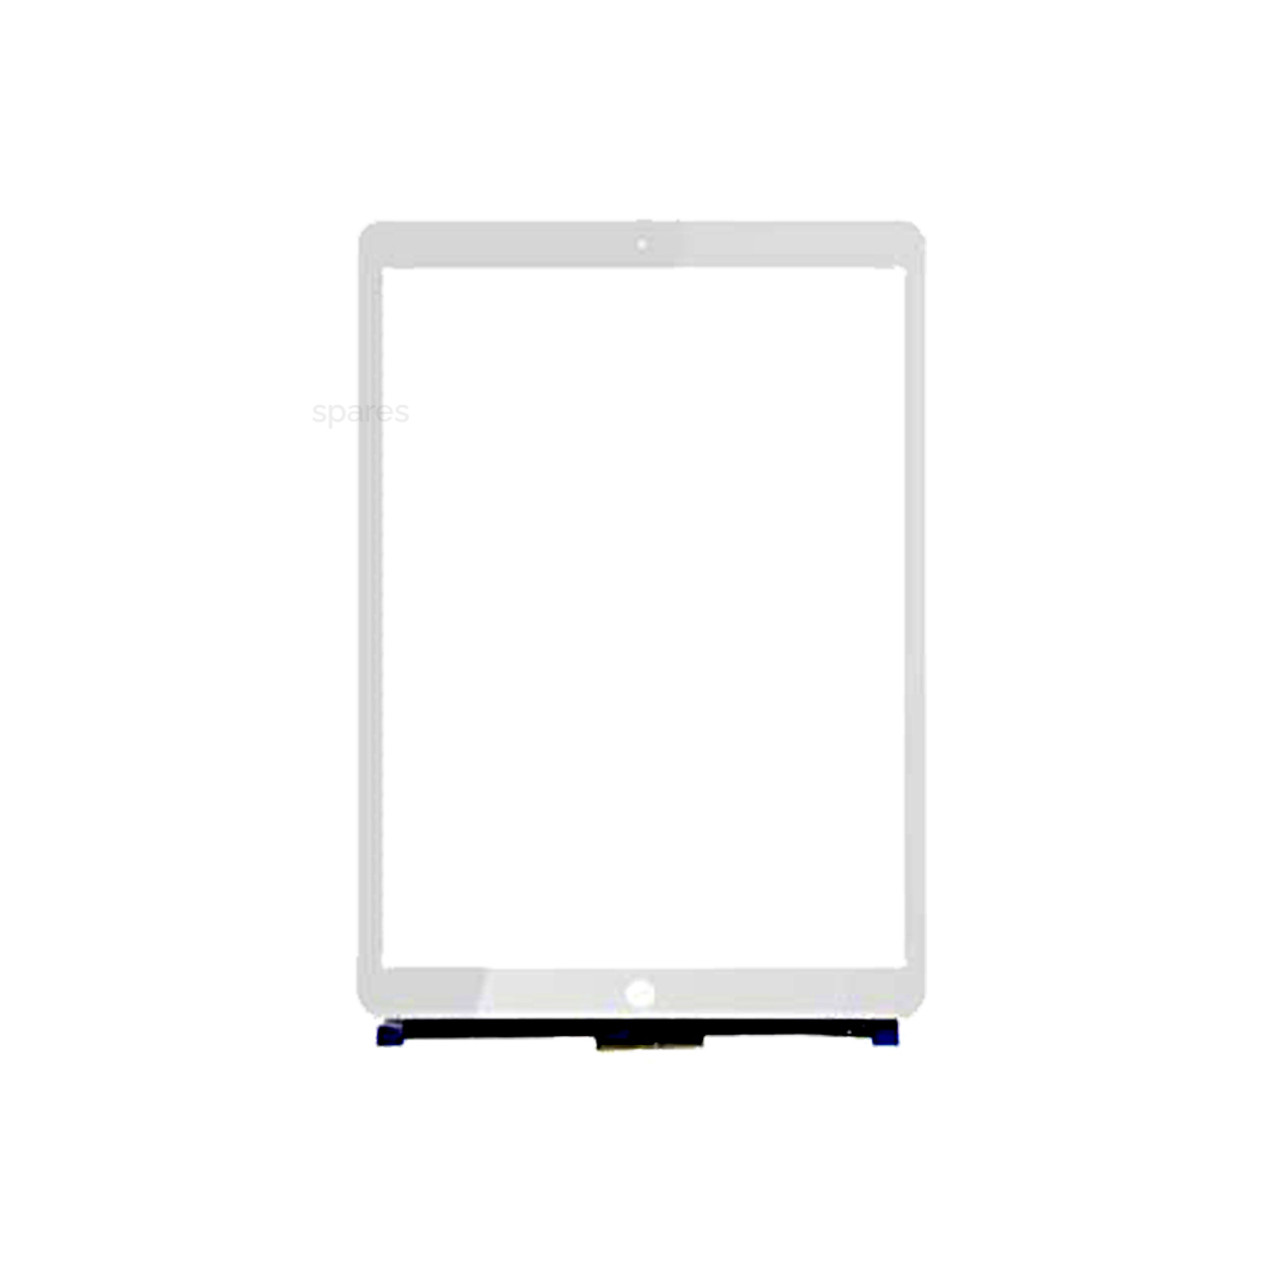 iPad Pro12.9-inch (2nd Gen) -Replacement Complete LCD & Digitizer Pre-White